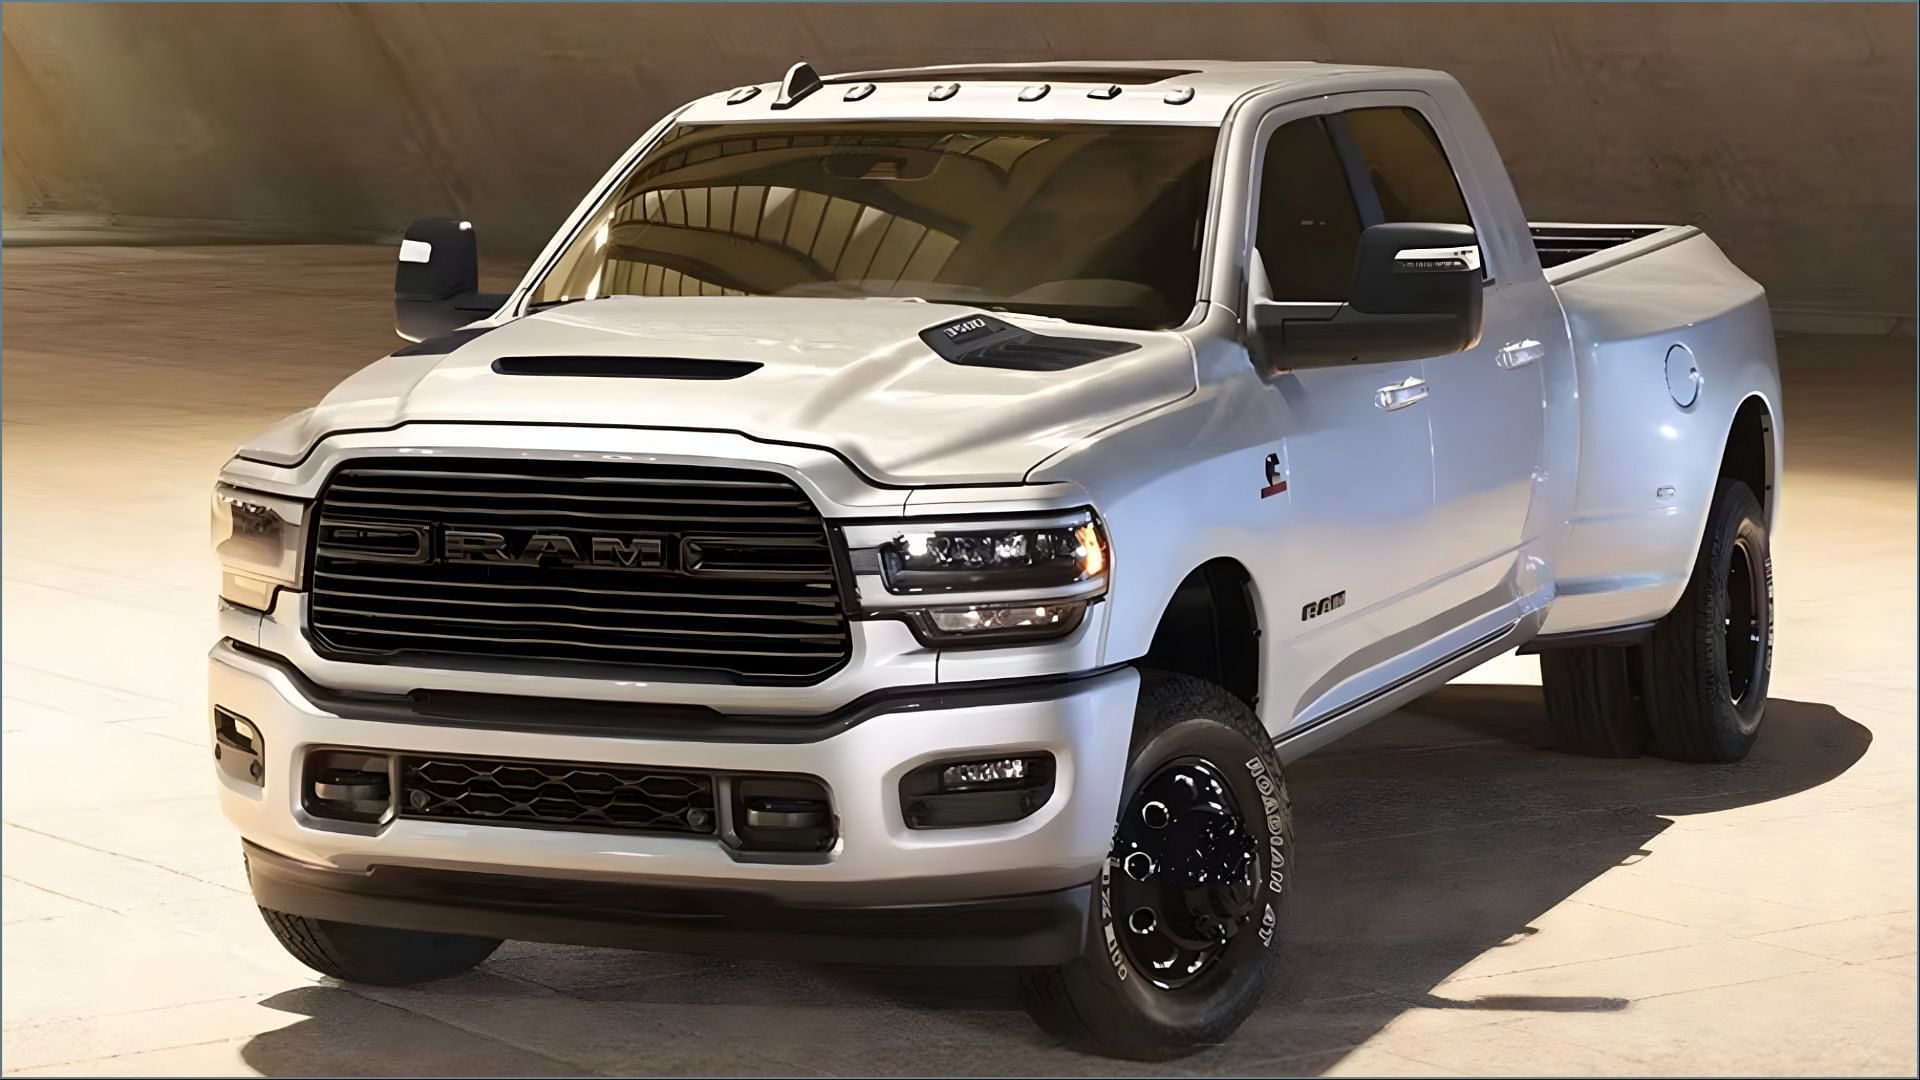 The RAM Trucks affected by the recall include RAM 2500 and RAM 3500 models (Image via RAM)